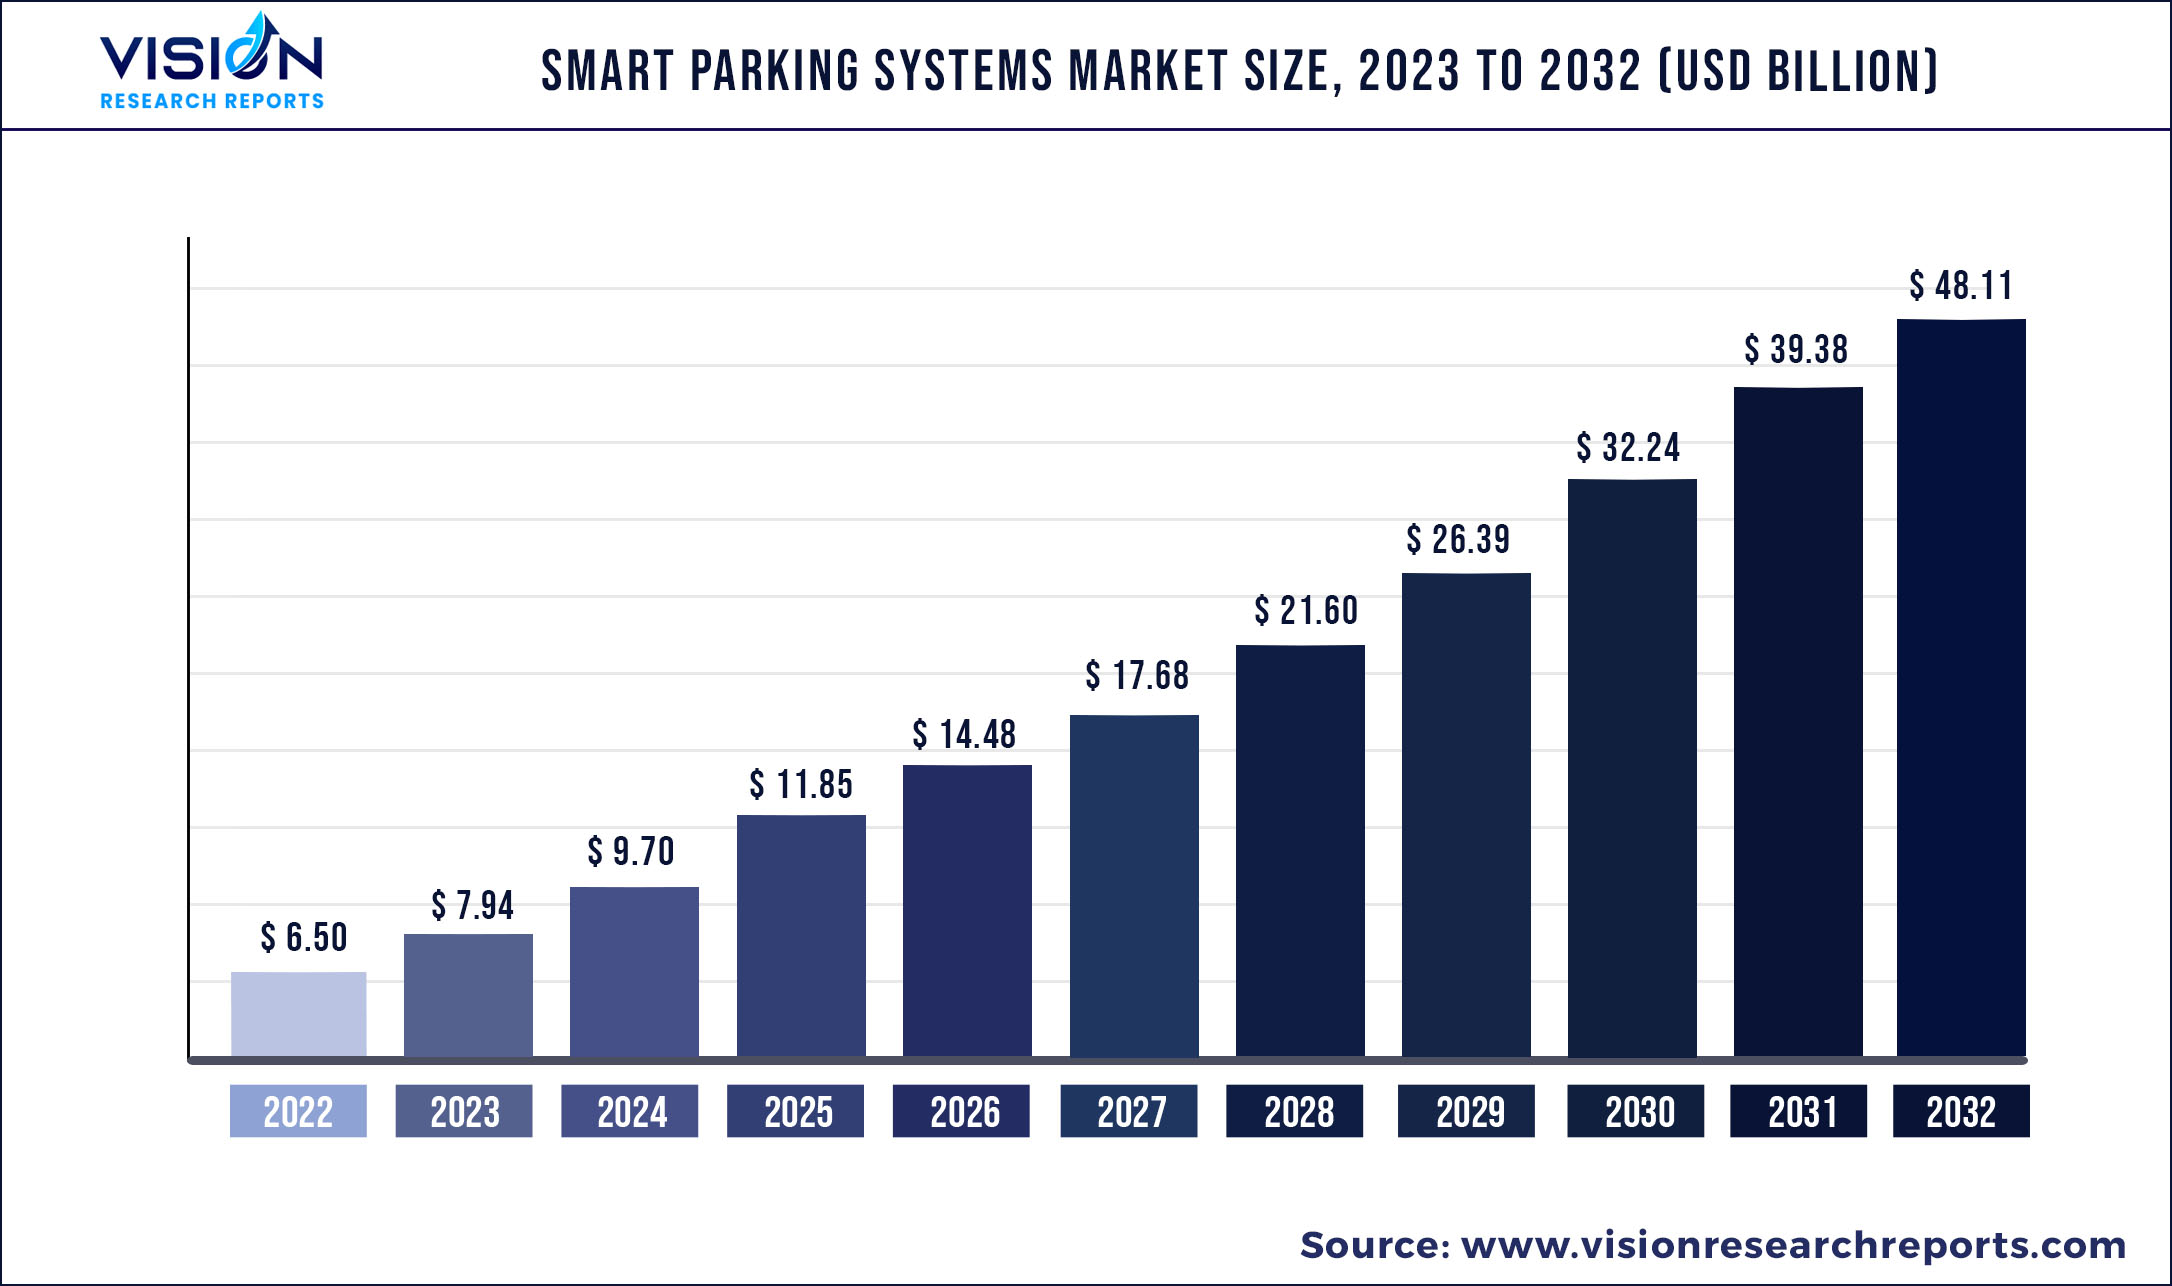 Smart Parking Systems Market Size 2023 to 2032